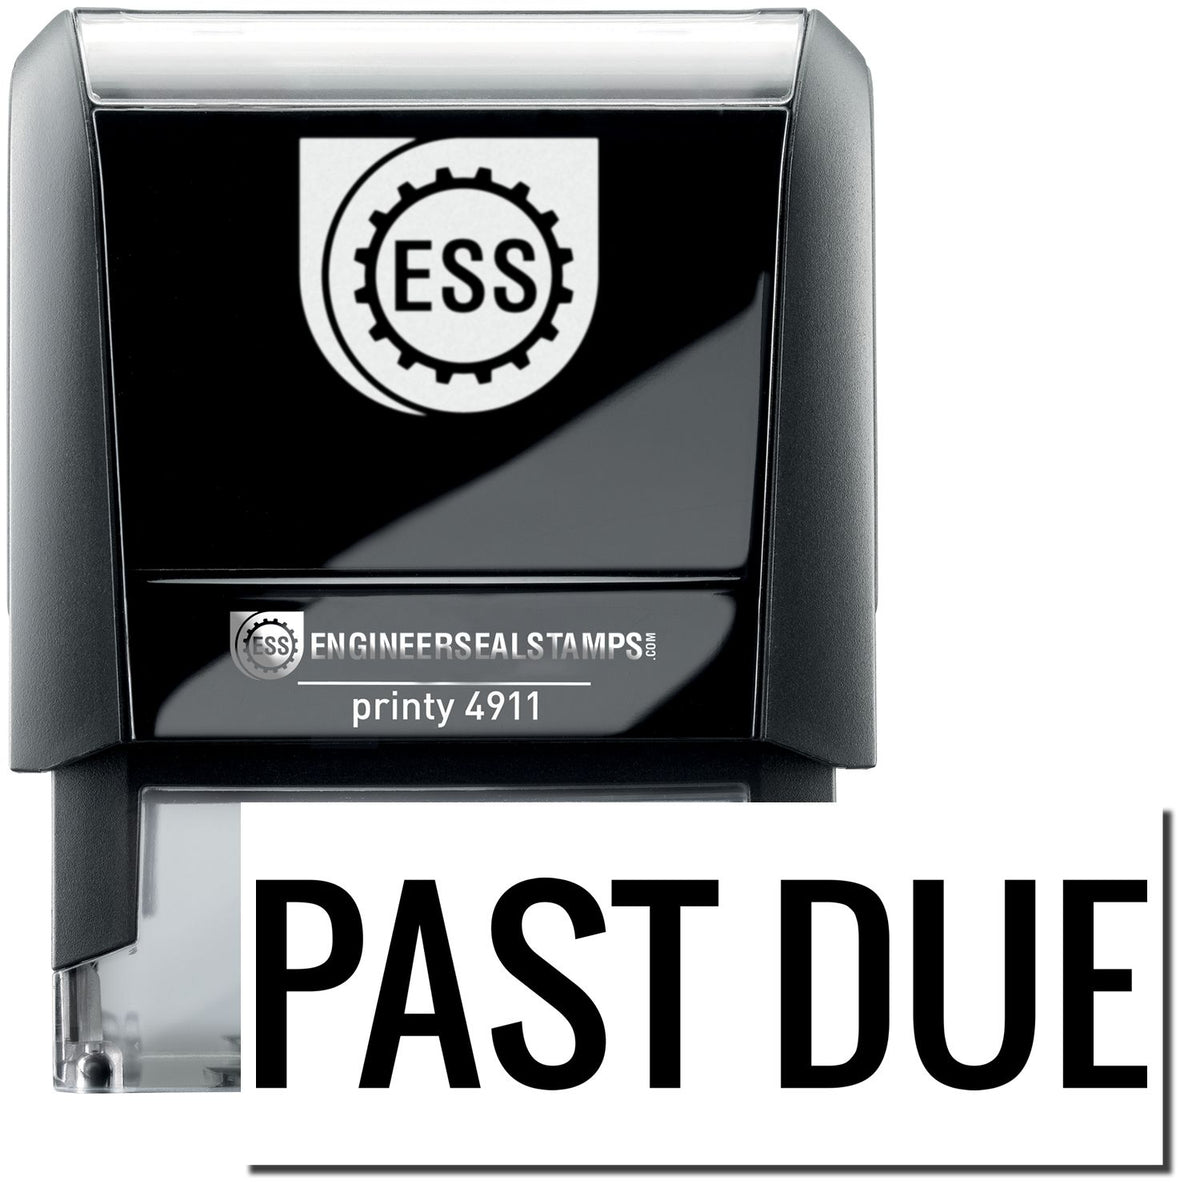 A self-inking stamp with a stamped image showing how the text &quot;PAST DUE&quot; in a narrow bold font is displayed after stamping.